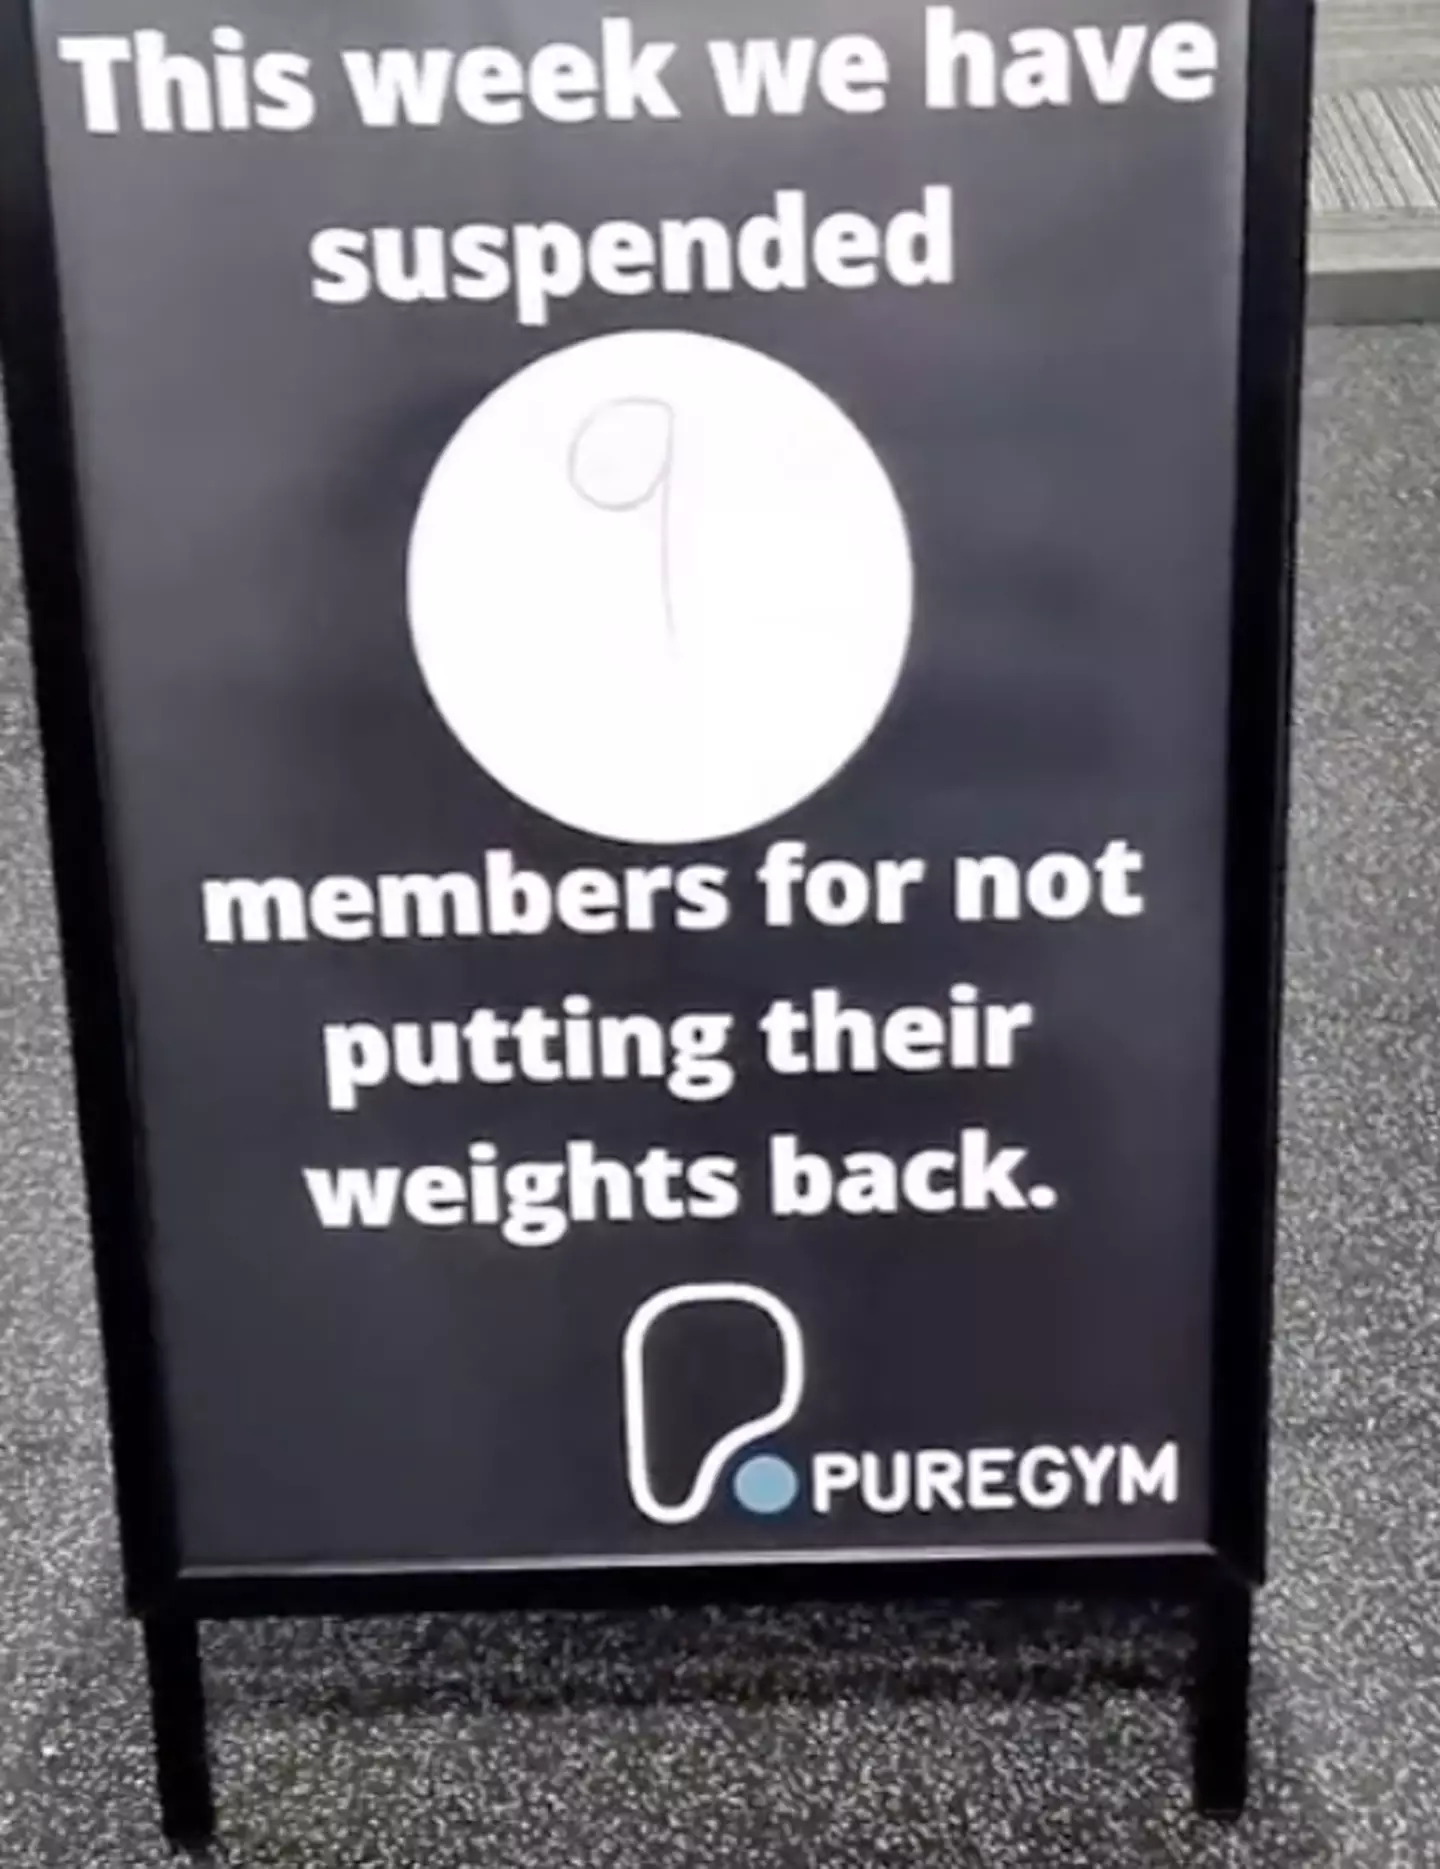 The other side of the sign revealed nine members had already been suspended that week for failing to put away their weights.